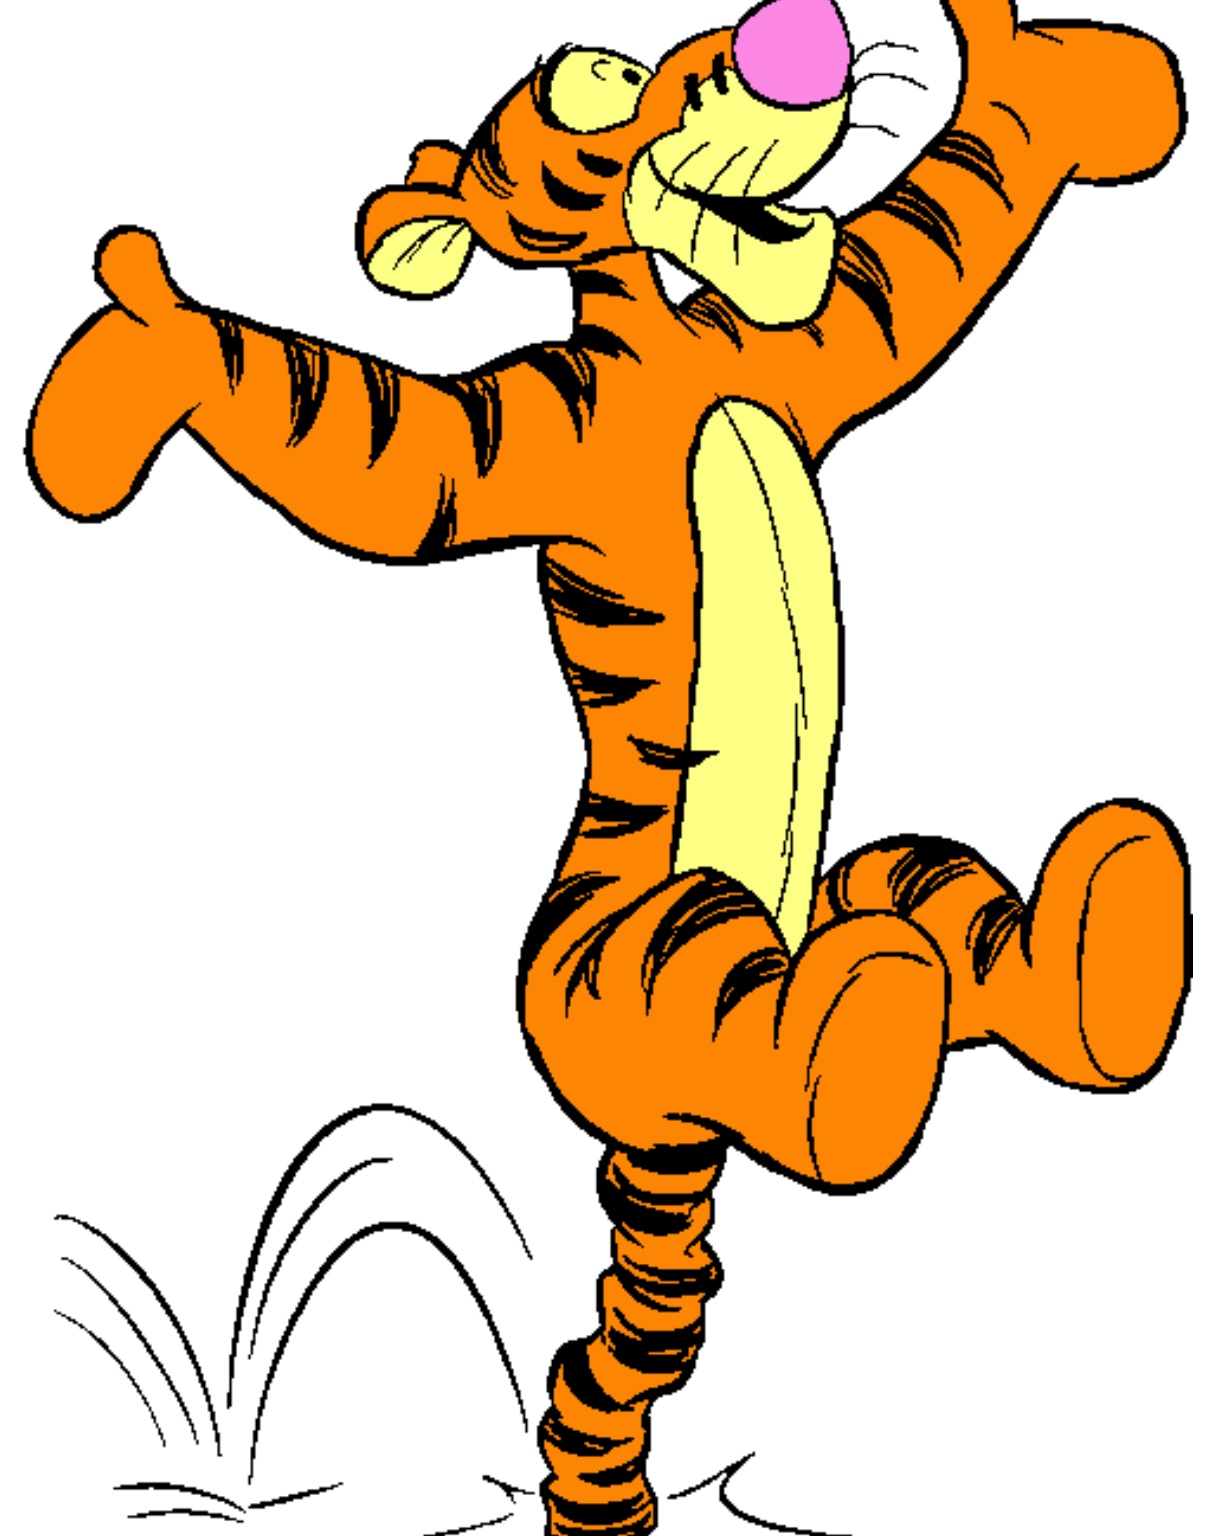 The Bouncing Energetic Tiger, TIGGER! 